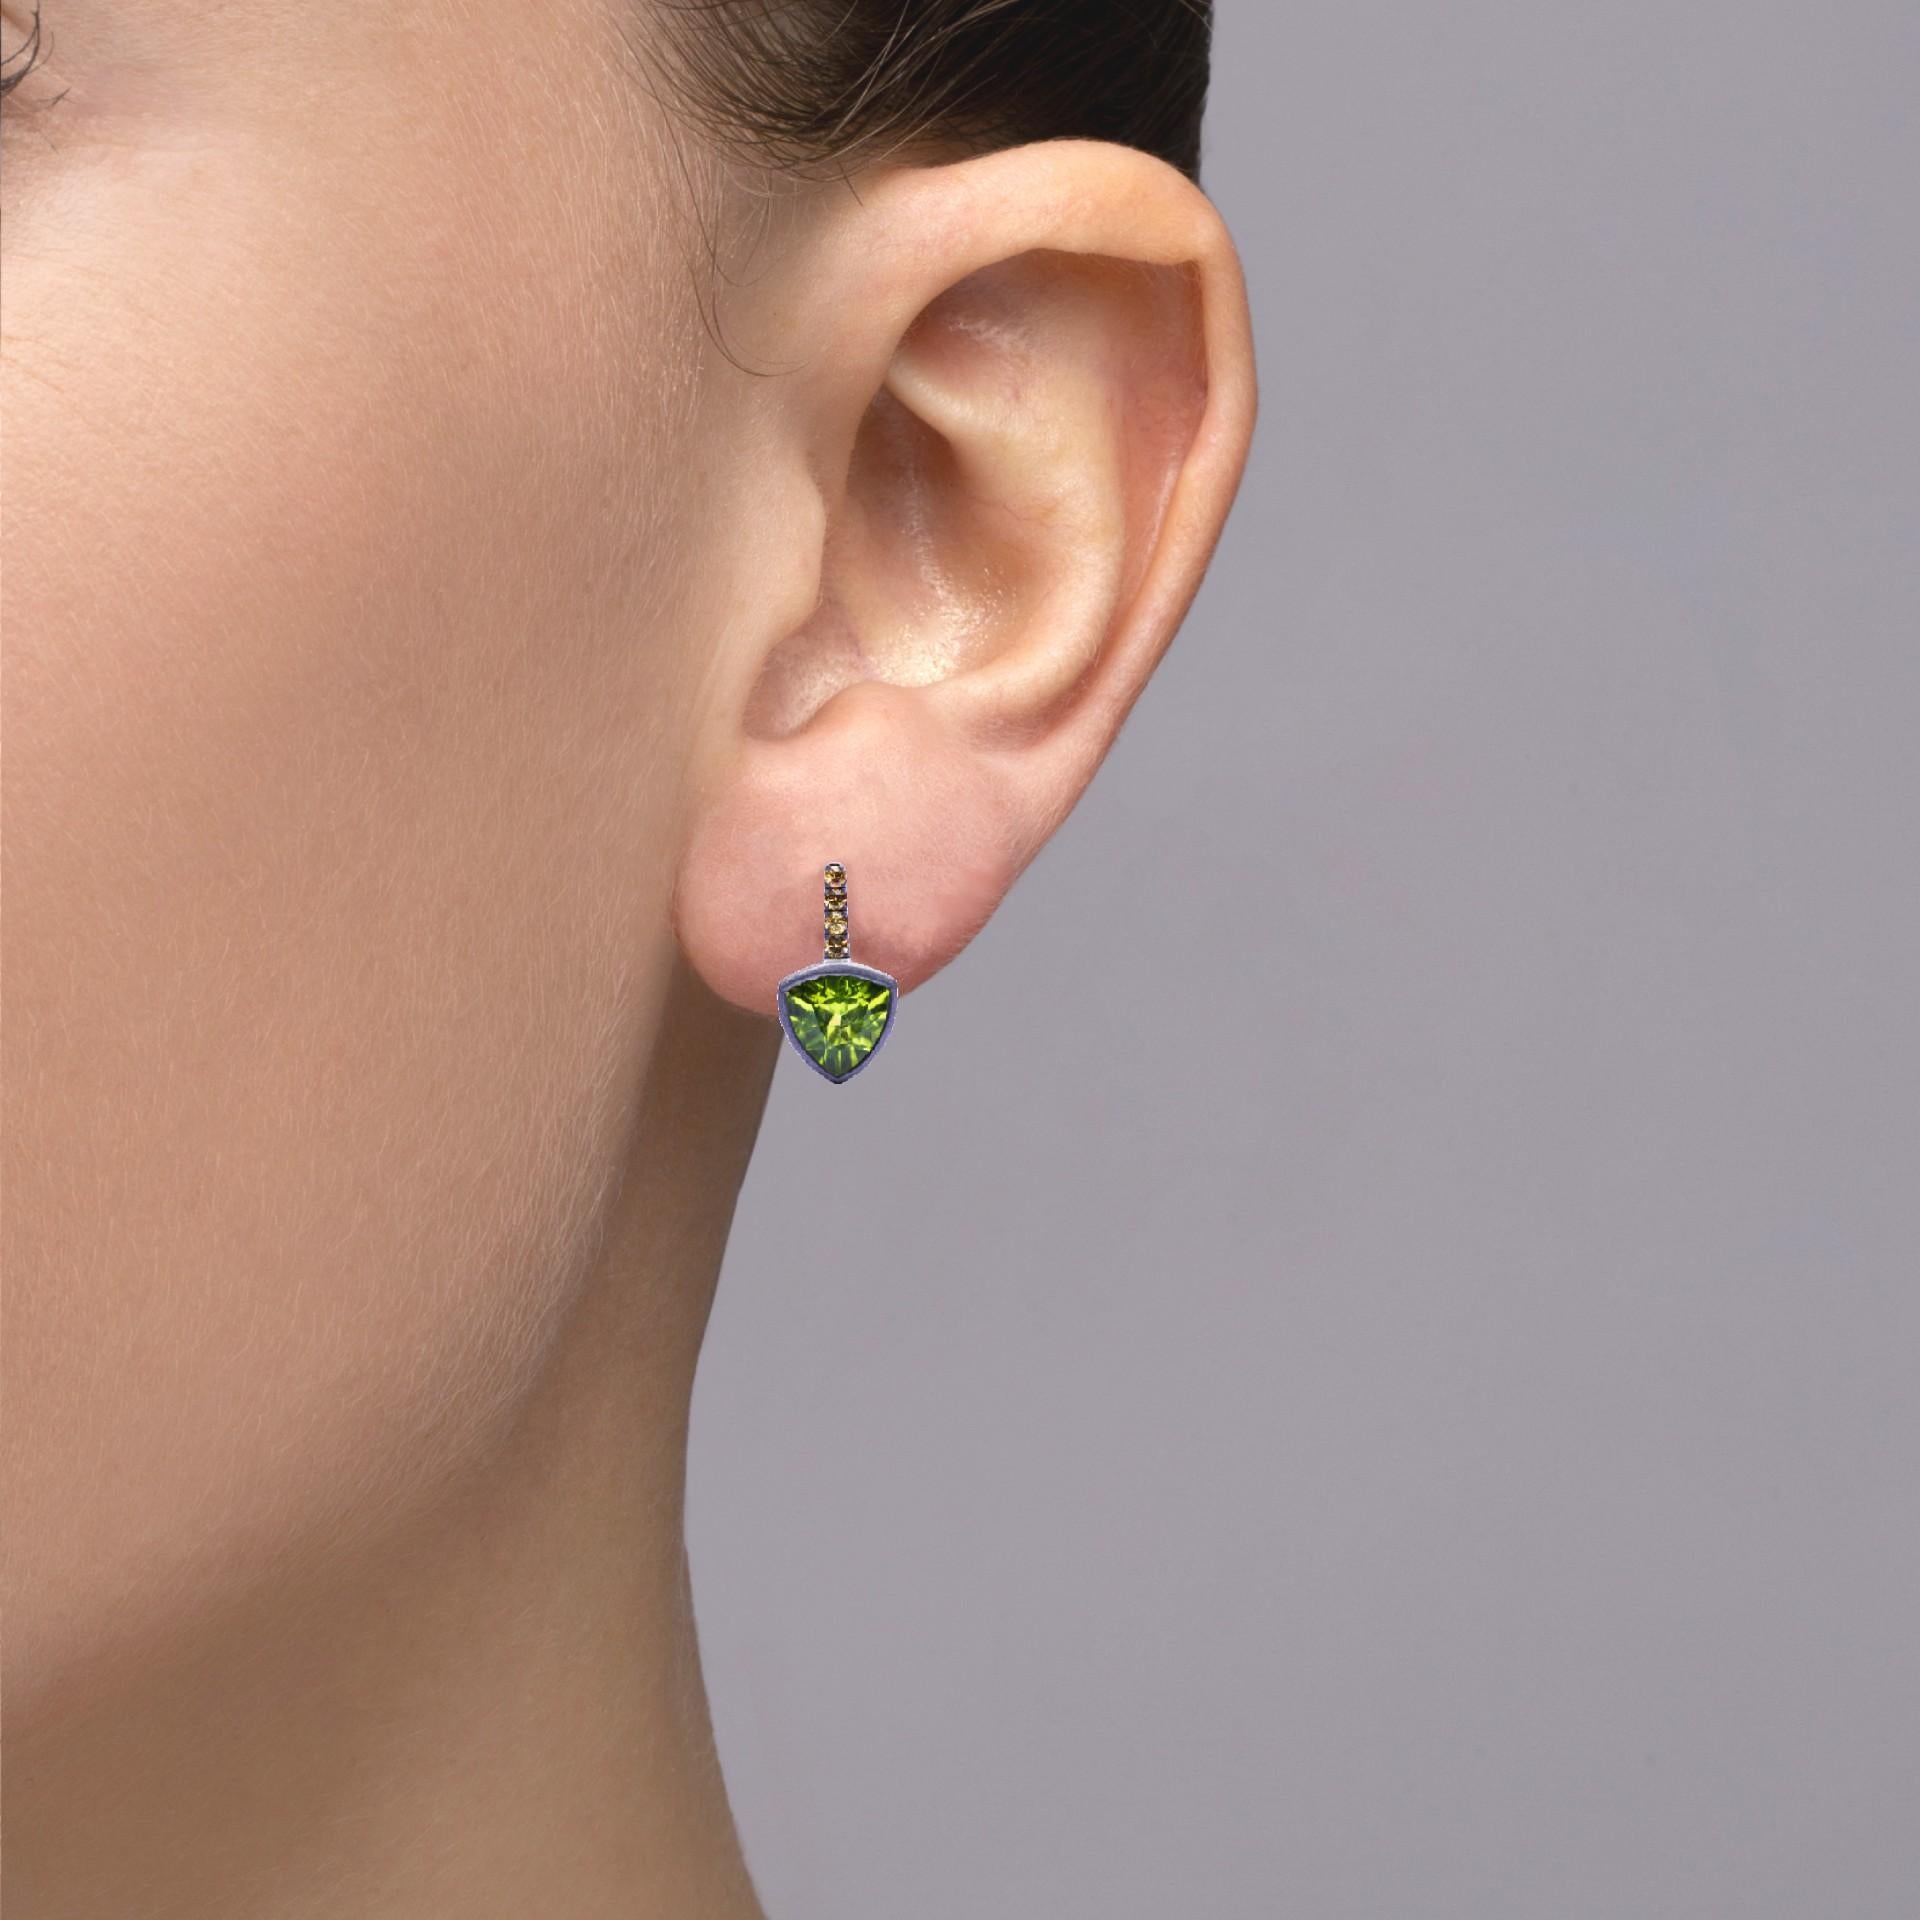 Alex Jona design collection, hand crafted in Italy, 18 karat white gold stud earrings with black rhodium set with two trillion cut peridots weighing 2.54 carats in total, surrounded by 0,15 carats of yellow sapphires.
Dimensions : H 0.57in/14.59mm,